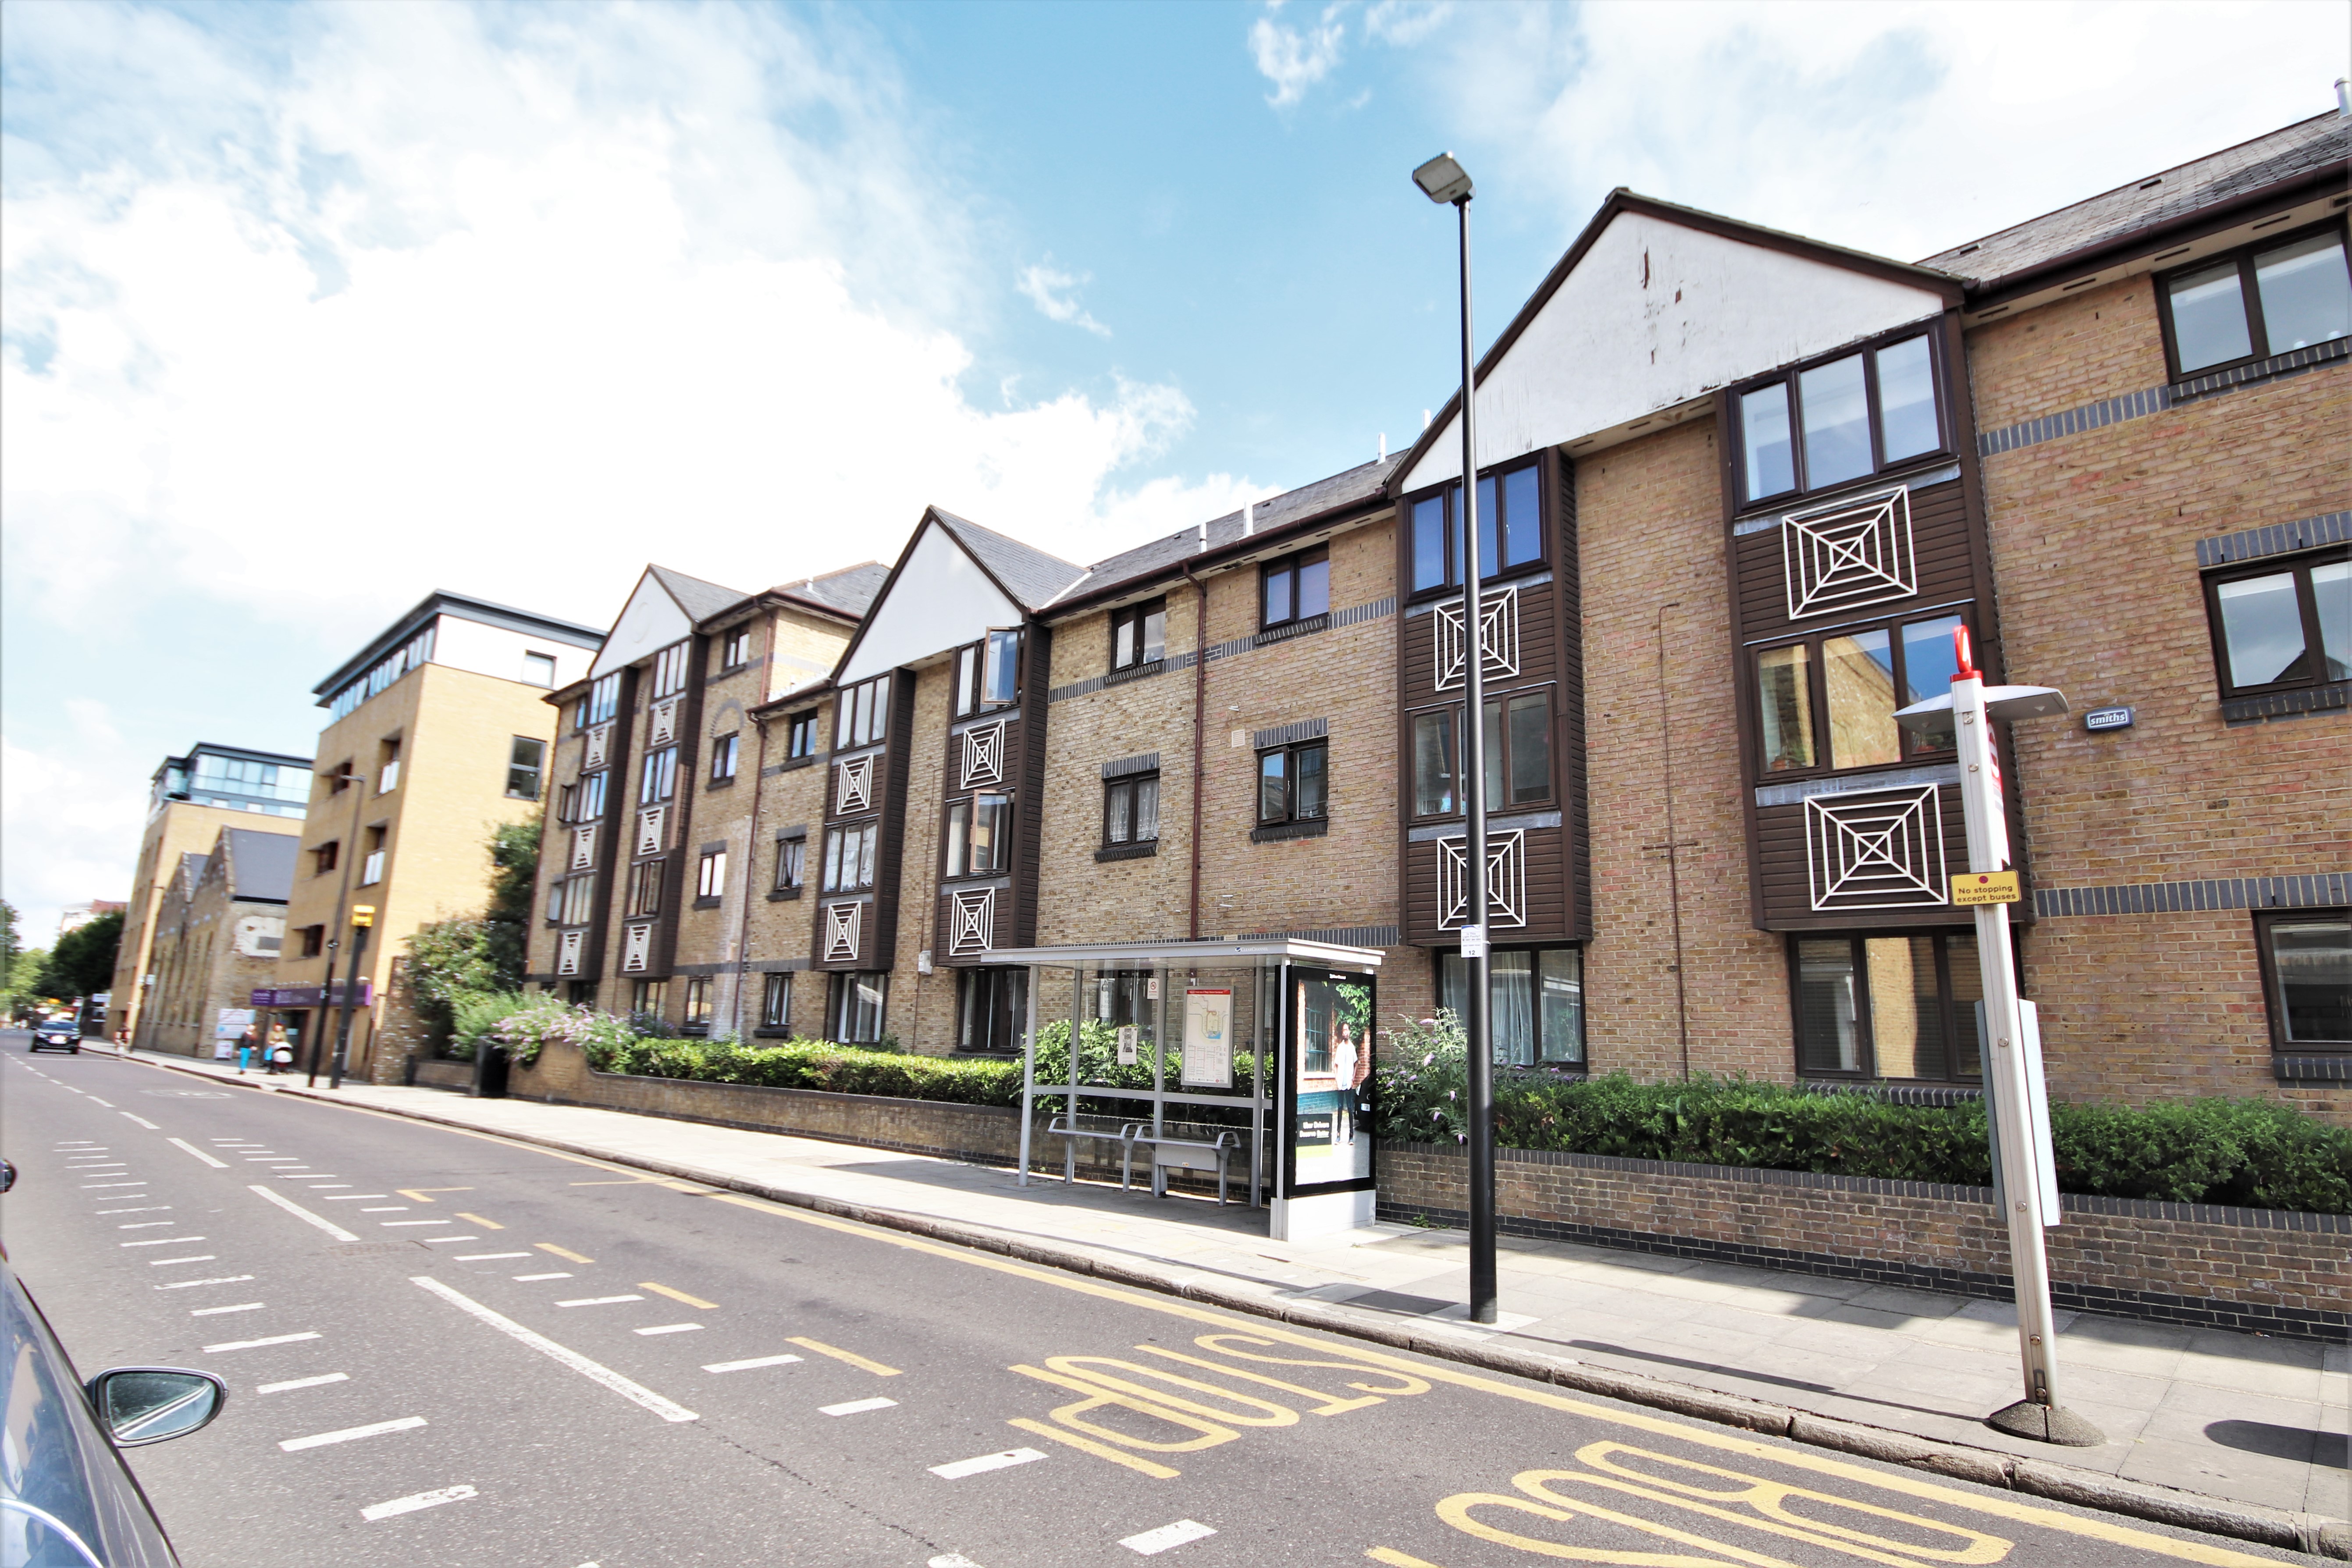 2 bed to rent in Tyndale Court, London, E14 